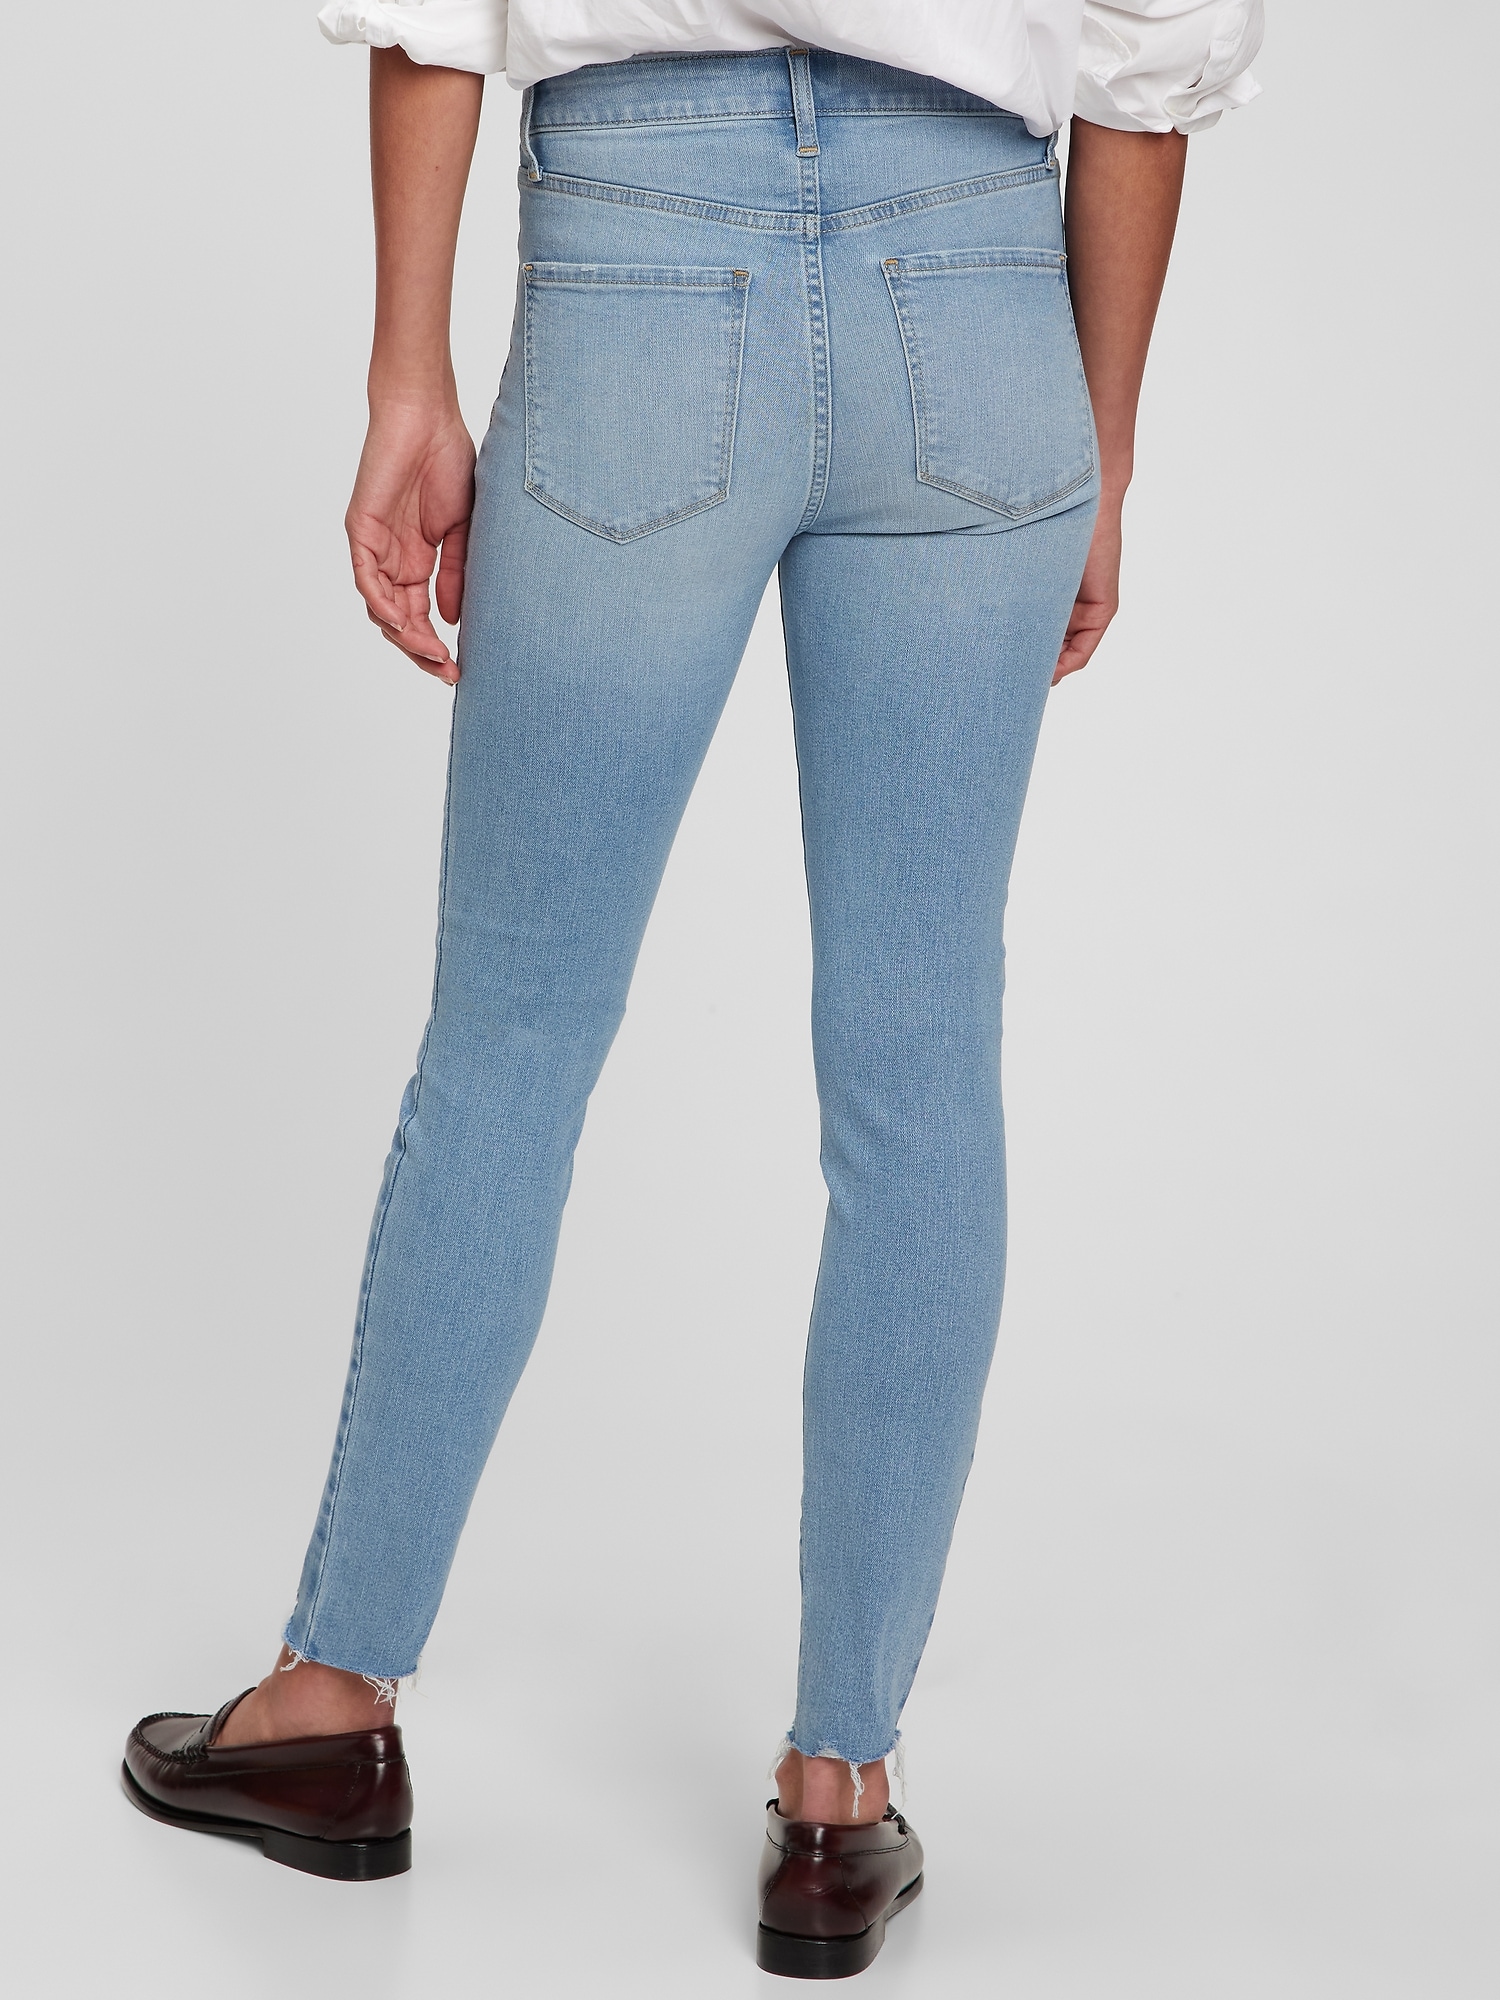 GAP High Rise Universal Legging Jeans with Button Fly